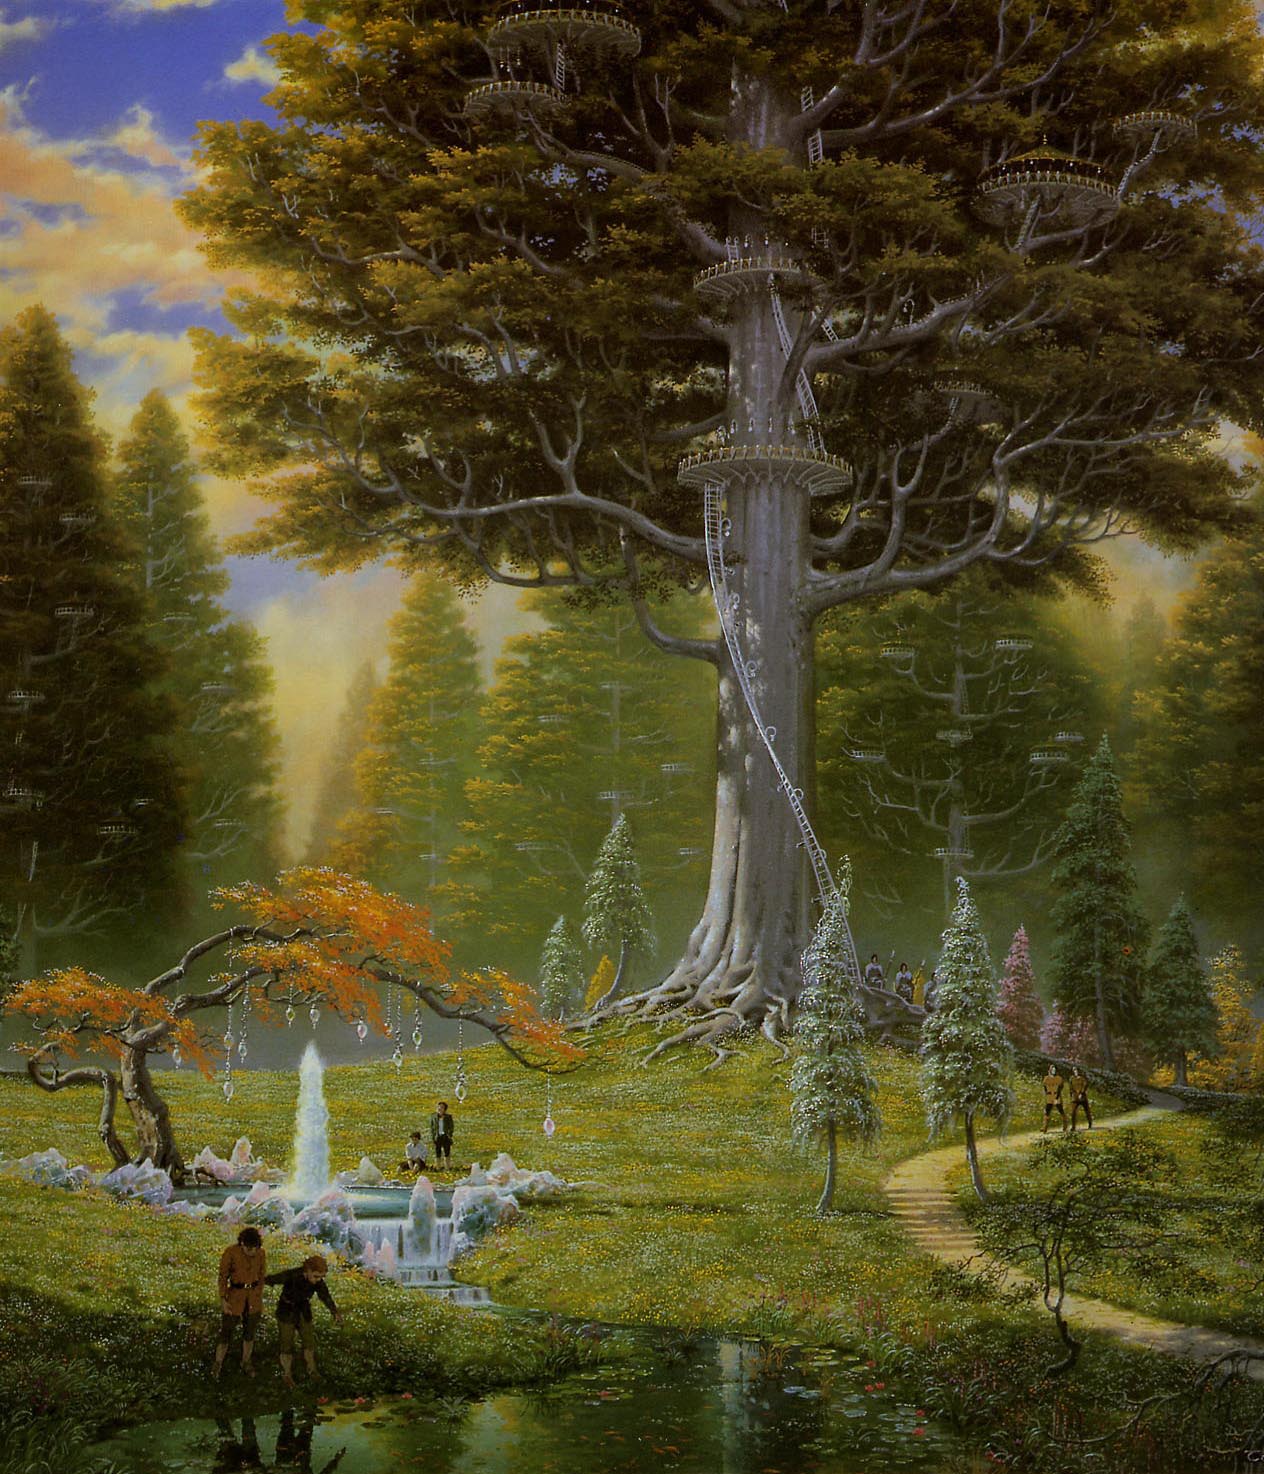 Ted Nasmith | Le Seigneur des Anneaux | The Great Tree at Caras Galadhon